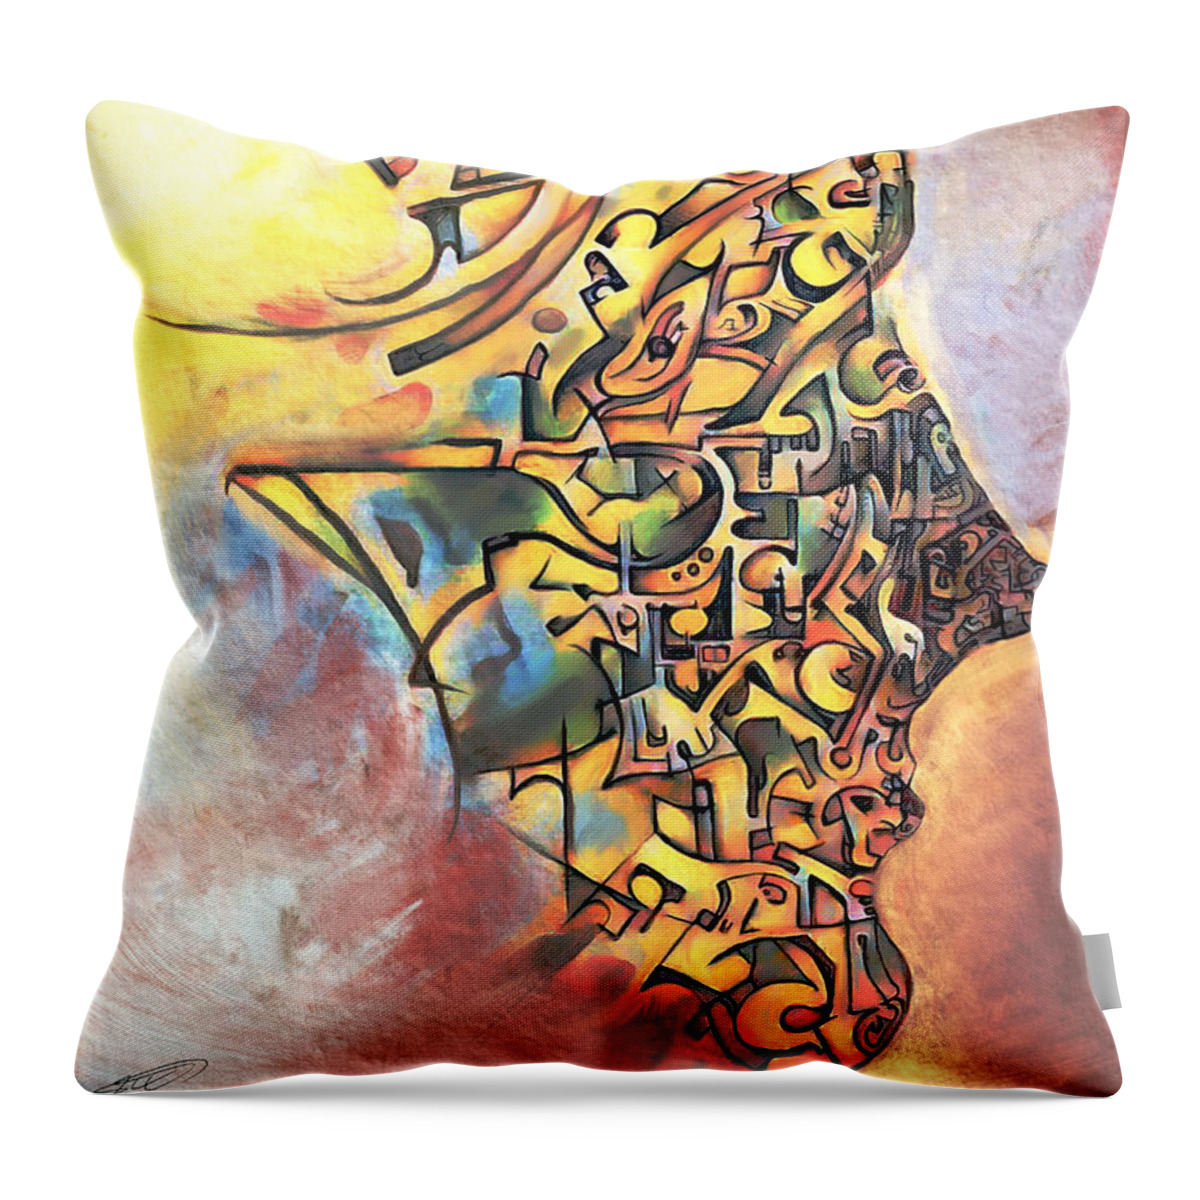 Cubism Throw Pillow featuring the digital art Processes inside by Dinko Dumancic